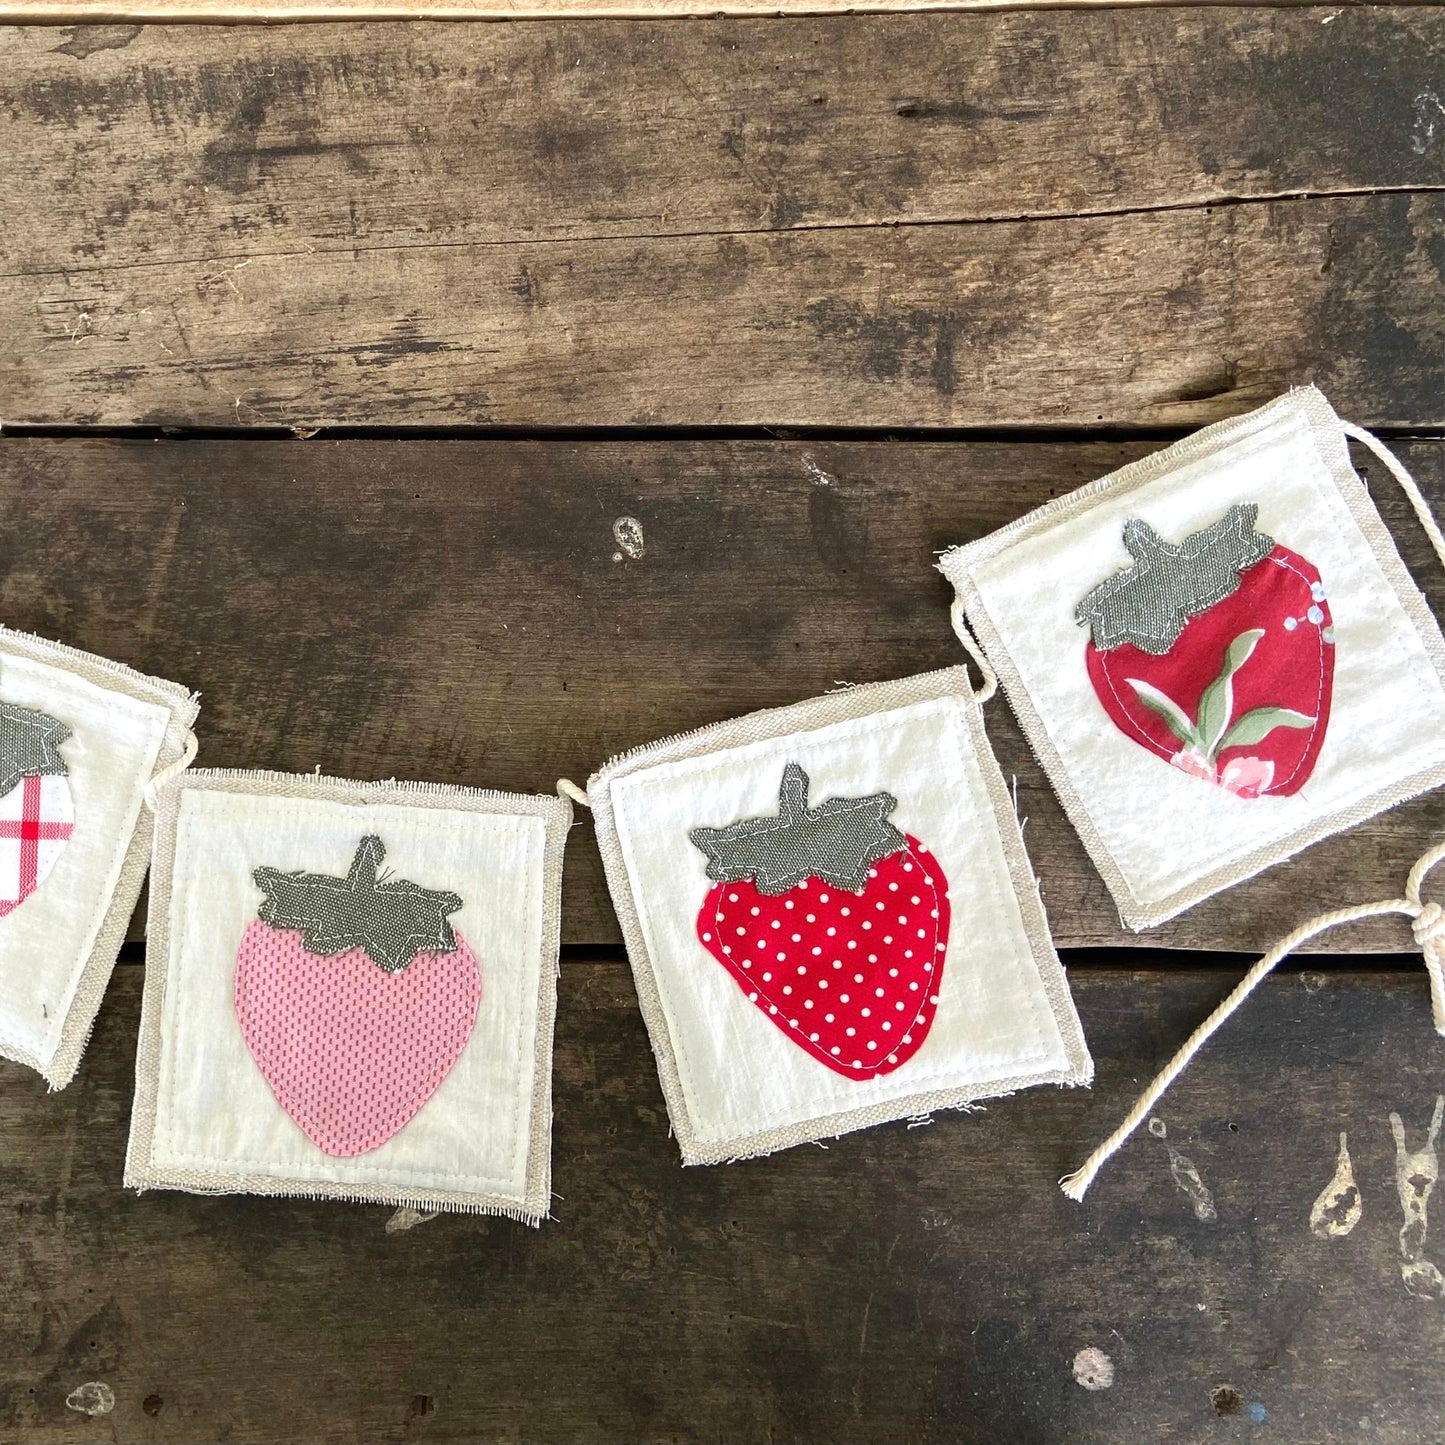 Canvas Strawberry Farmers Market Bunting Banner with Vintage Fabrics & Calico Prints